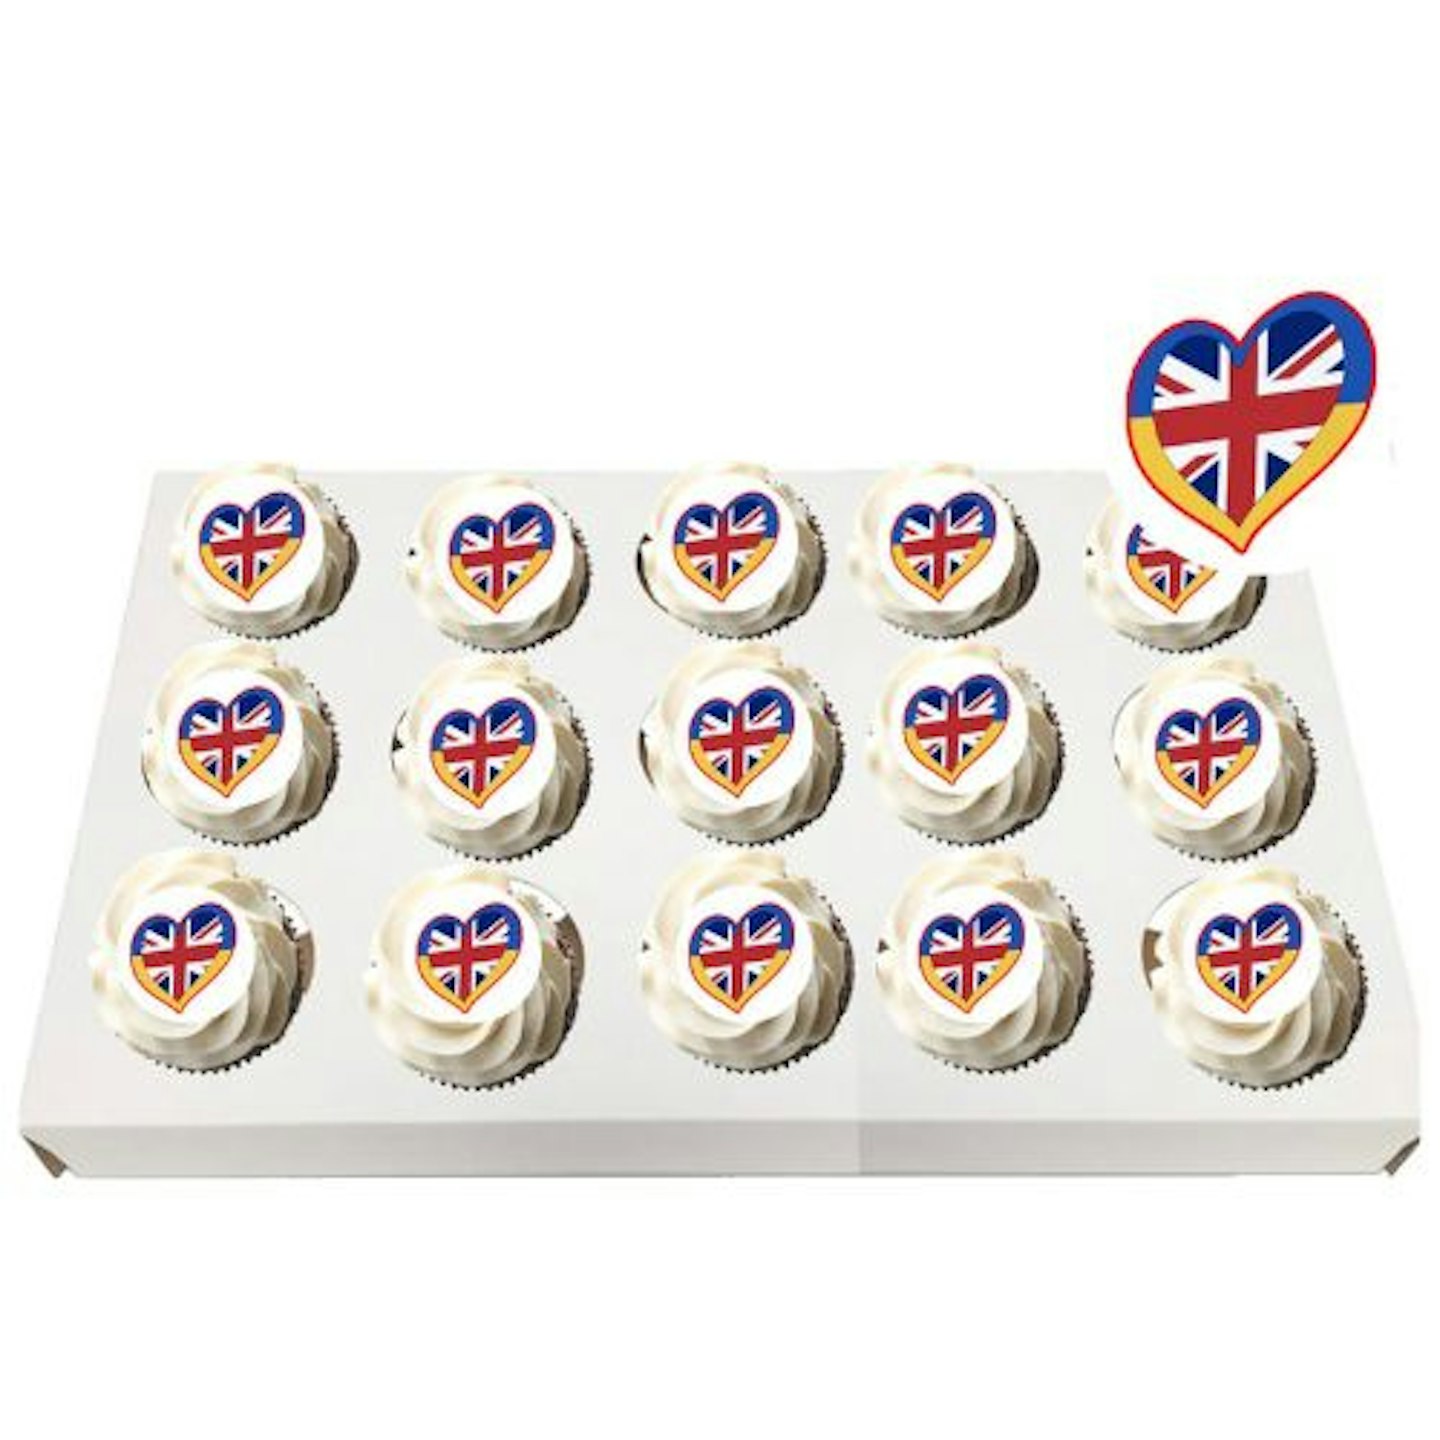 Eurovision Edible Cake Toppers - Union Jack Ukraine Heart I love Eurovision Party Pack!